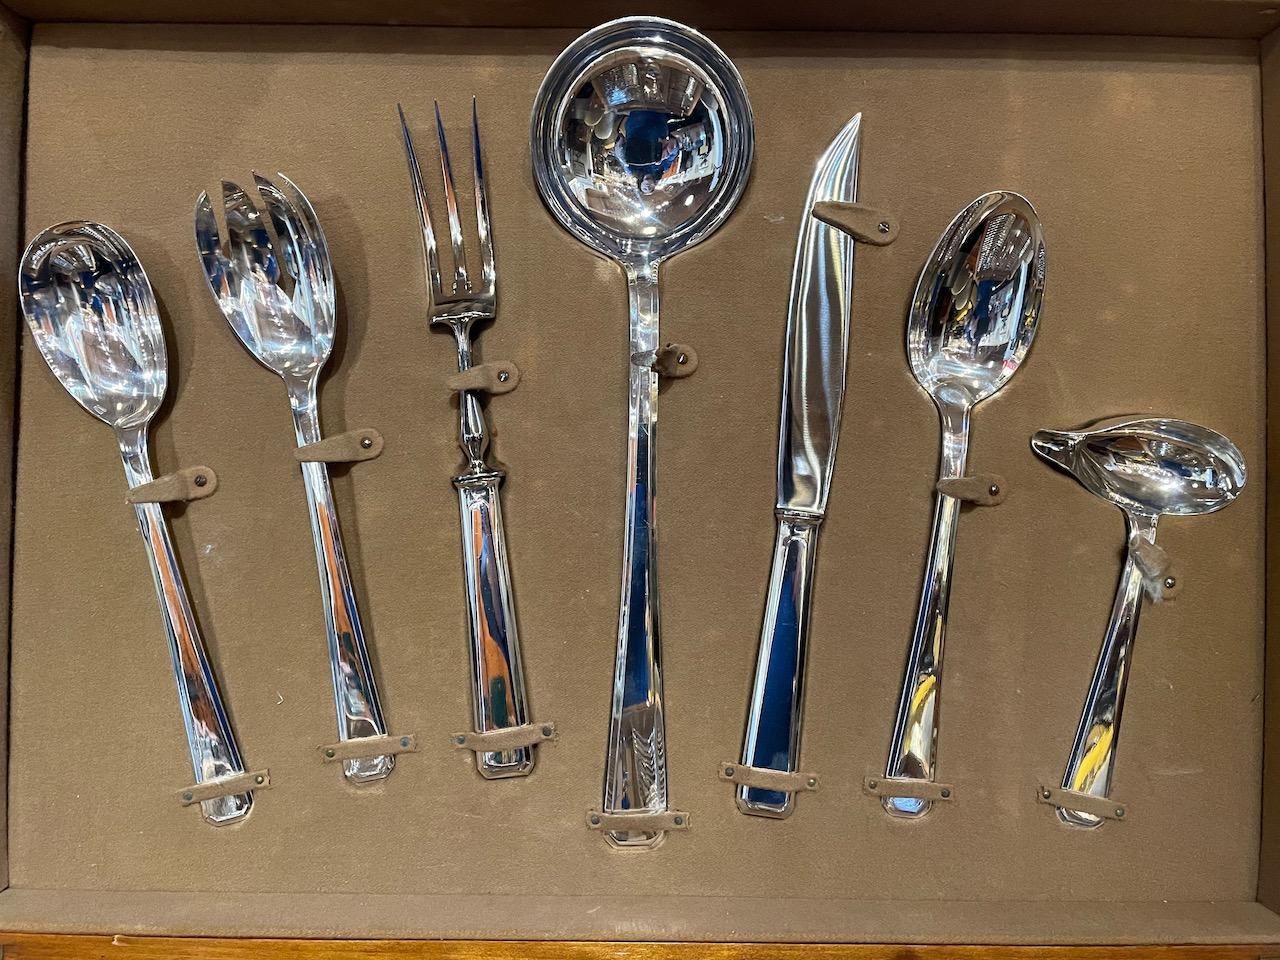 Complete Art Deco Silverware Service for 12 by Ravinet d'Enfert of France 6